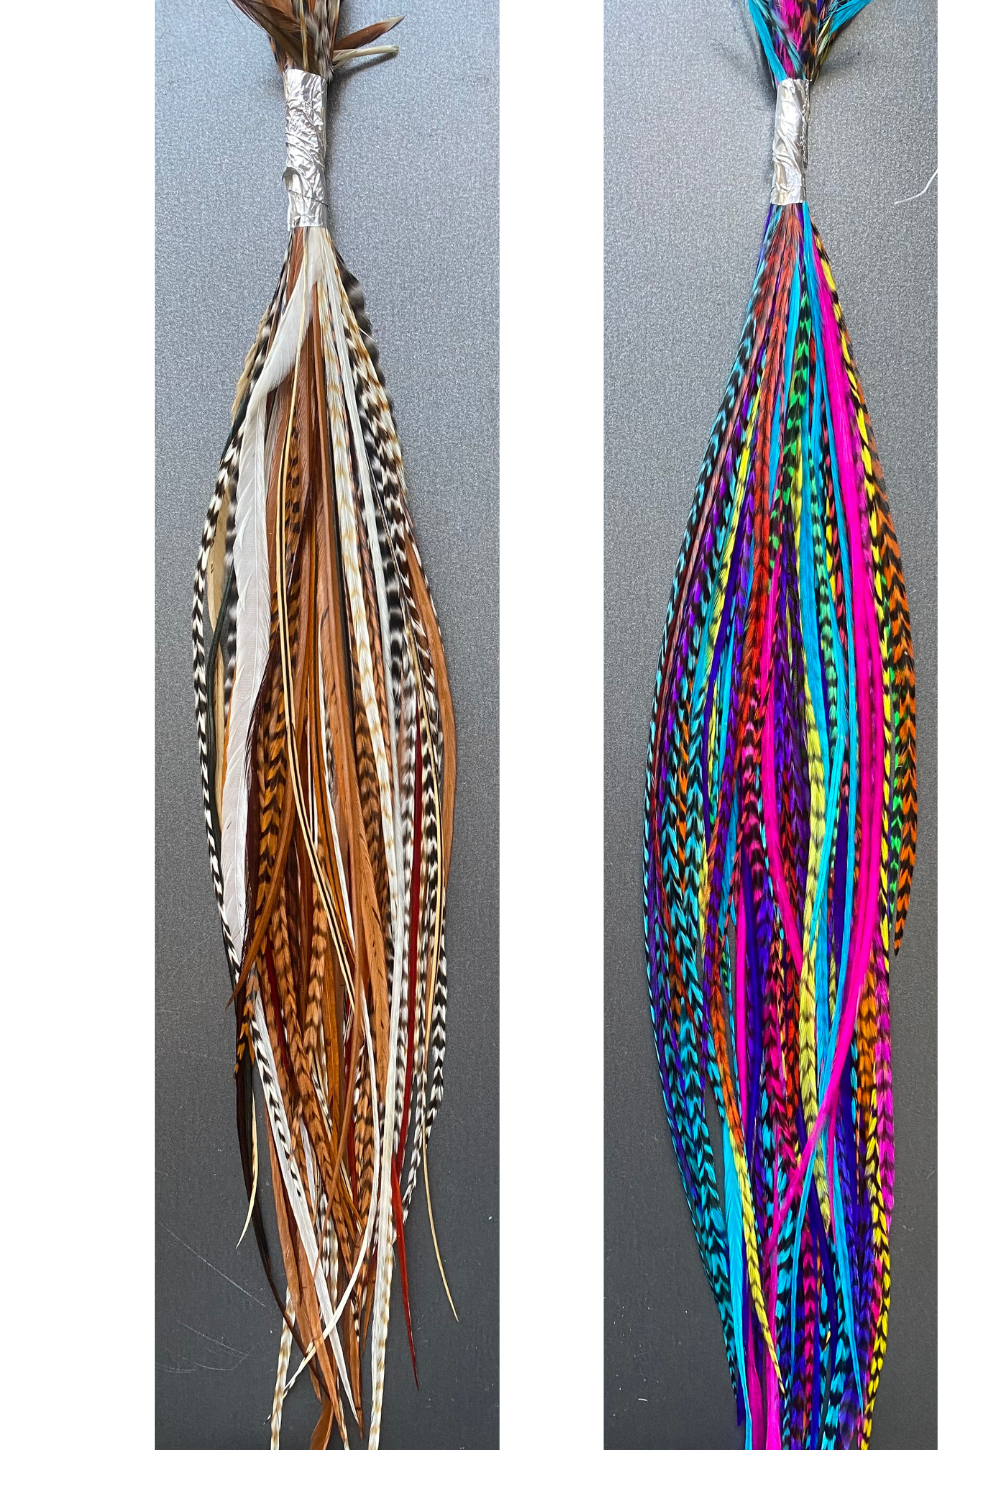 How Long Will Hair Feathers Last? – Feather Lily Hair Feathers